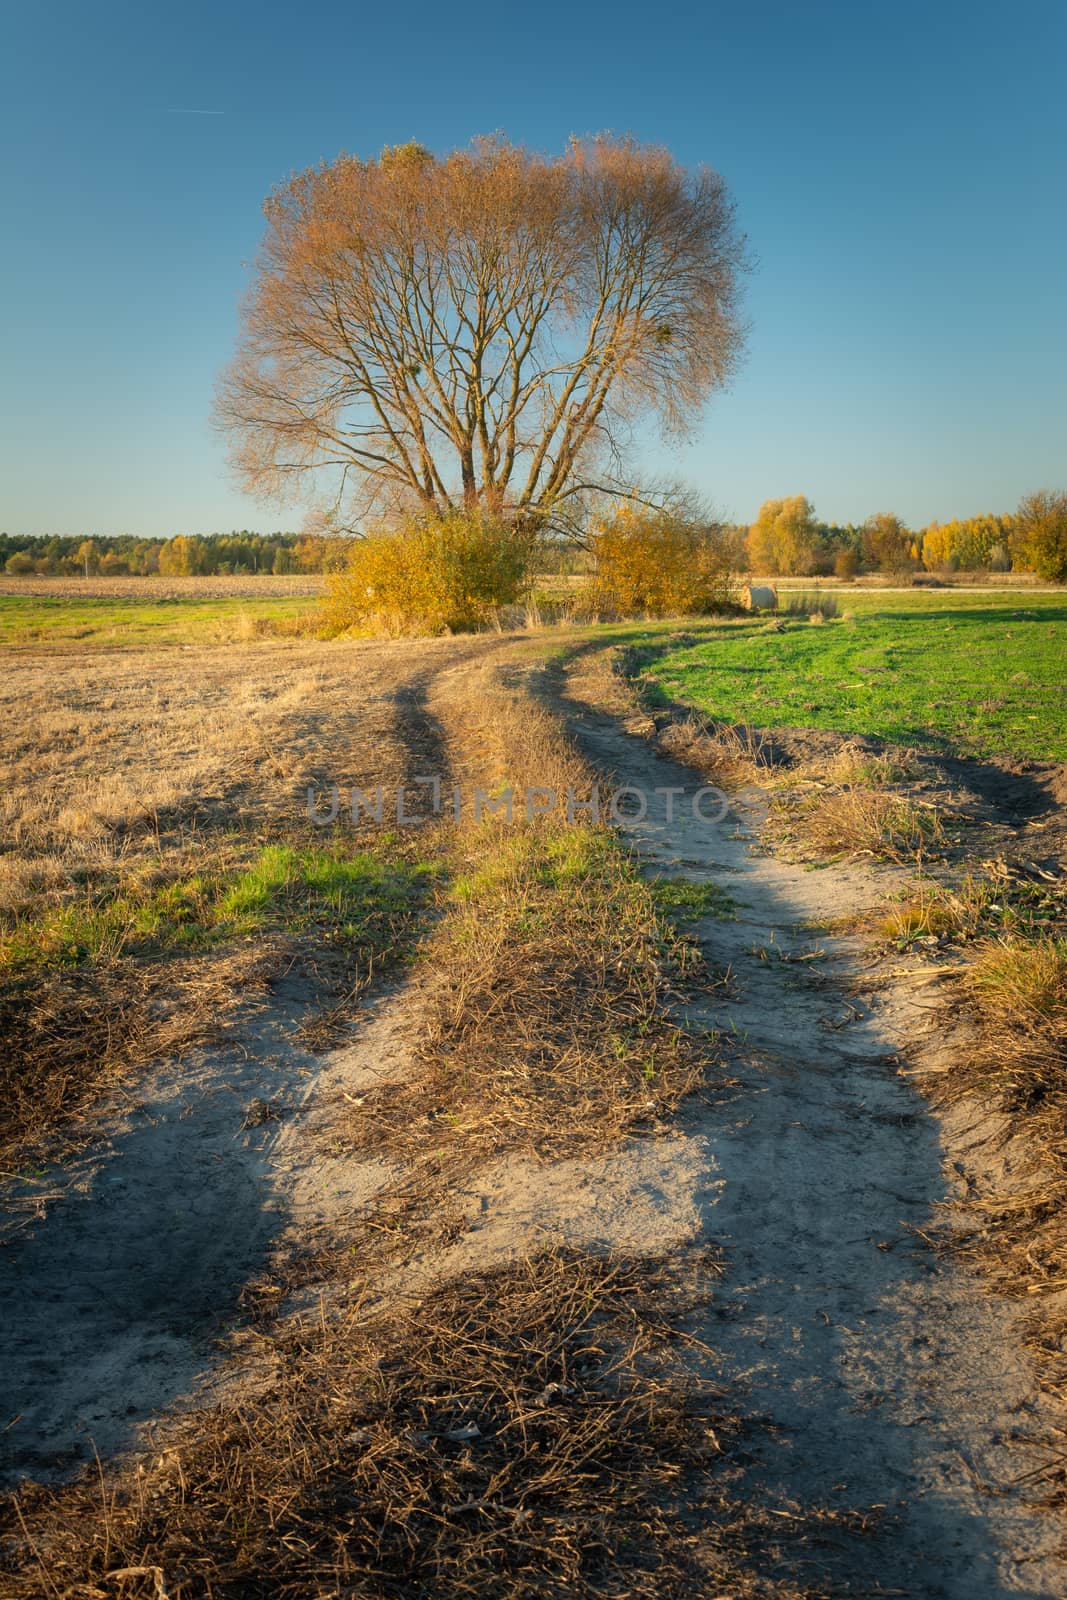 Dirt road towards a tall tree with no leaves by darekb22